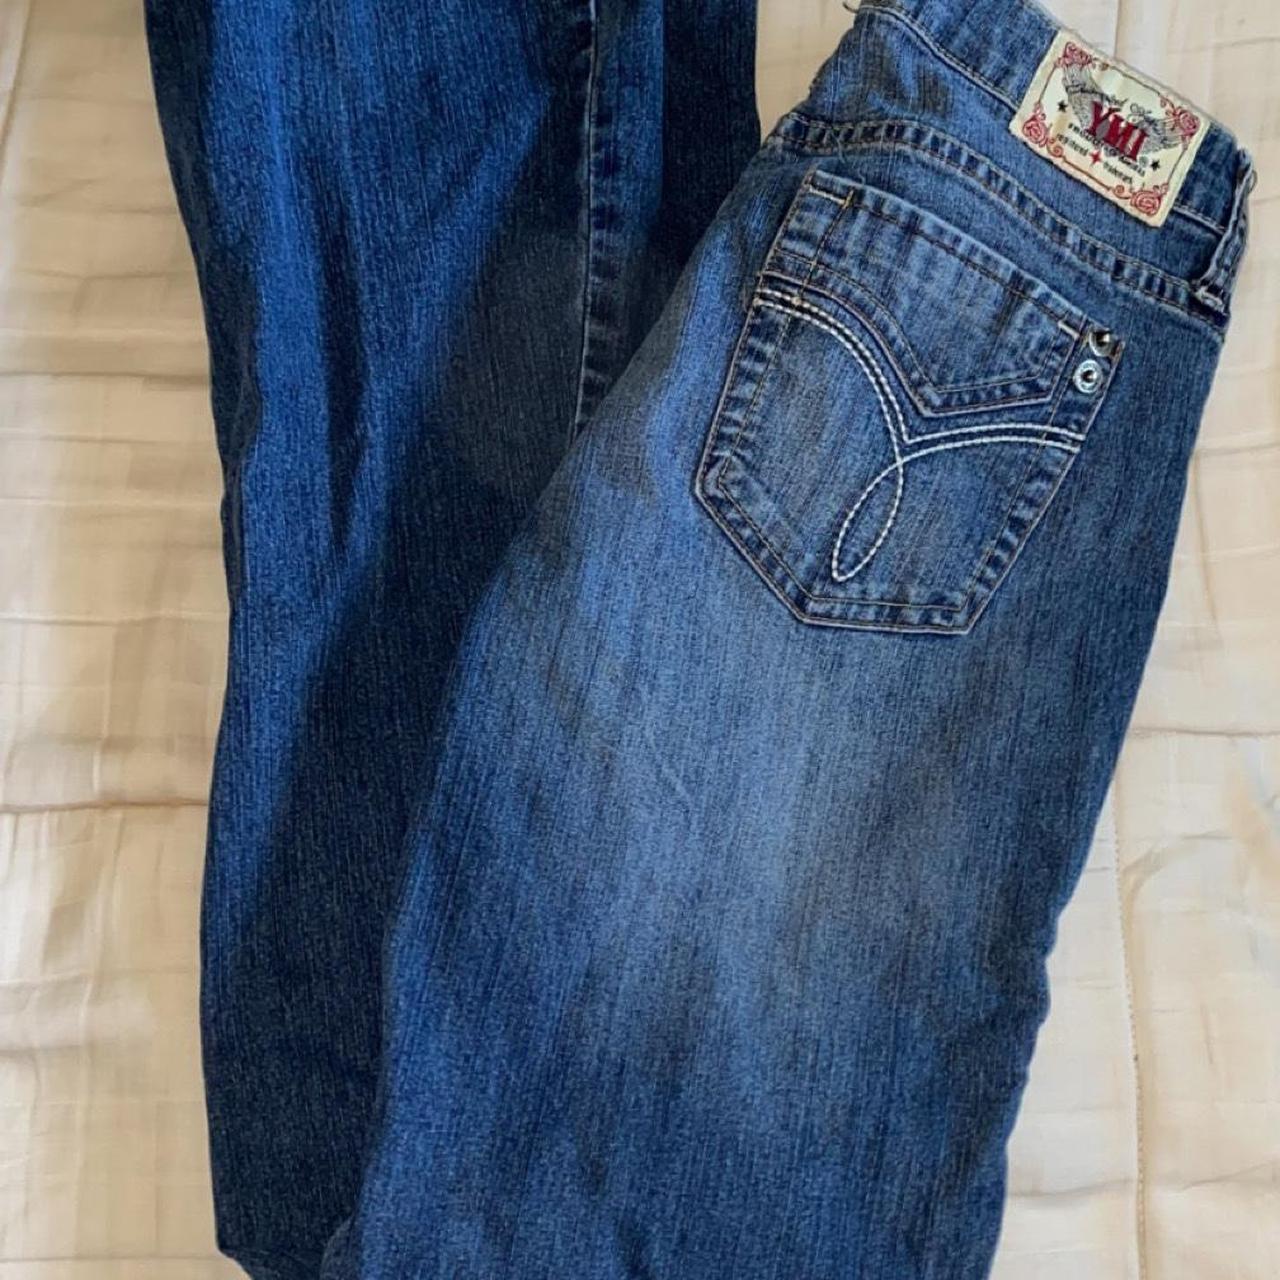 Vintage 2000’s ymi jeans, Size 7, Accepting offers